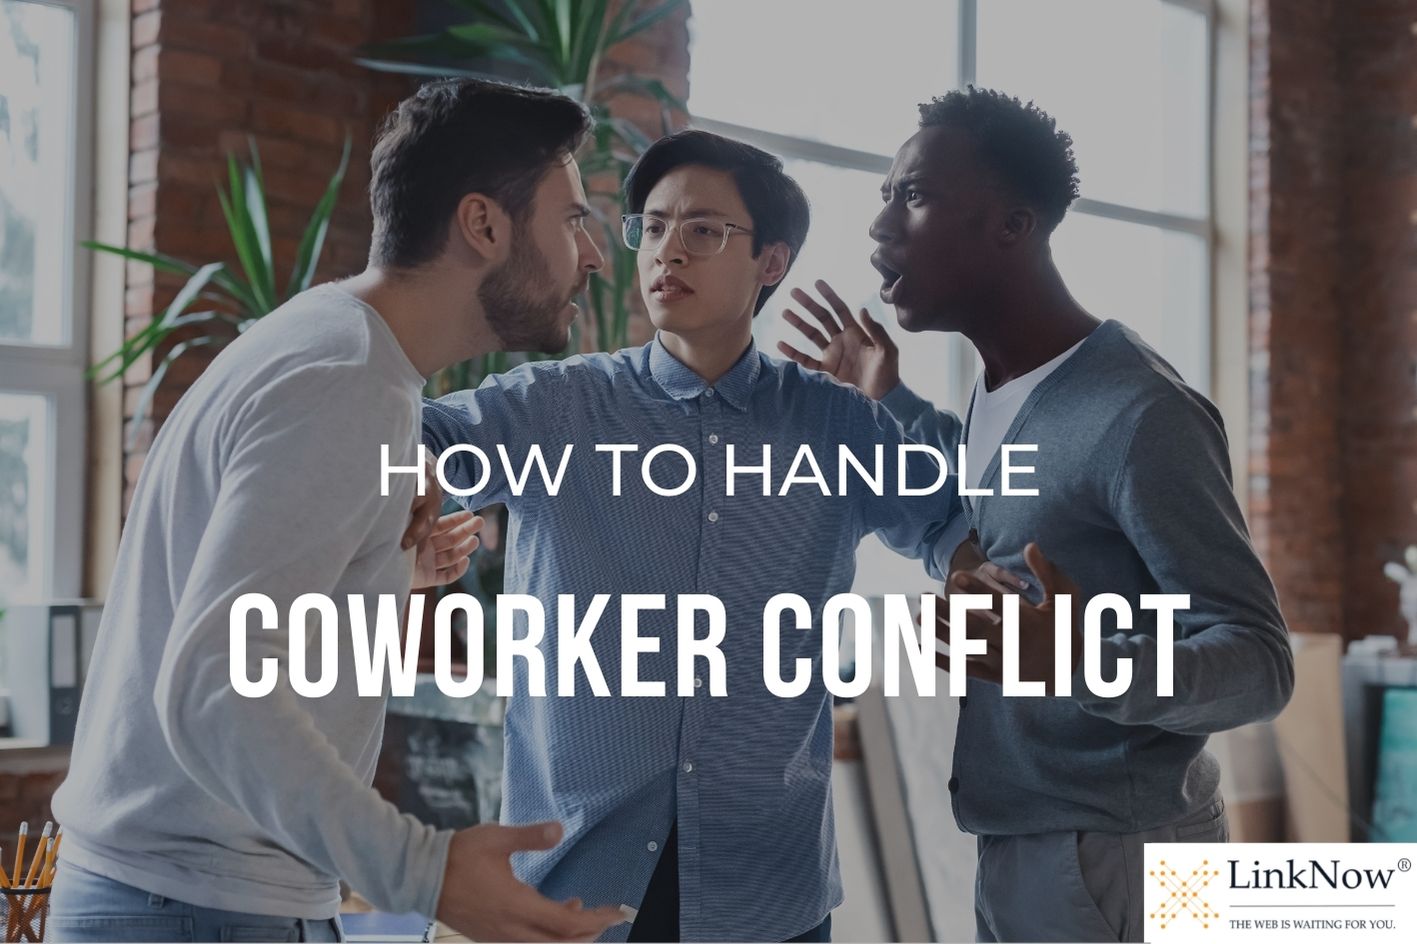 Two people argue while a third person tries to get in between them. Title overlaid says: "How to handle coworker conflict."